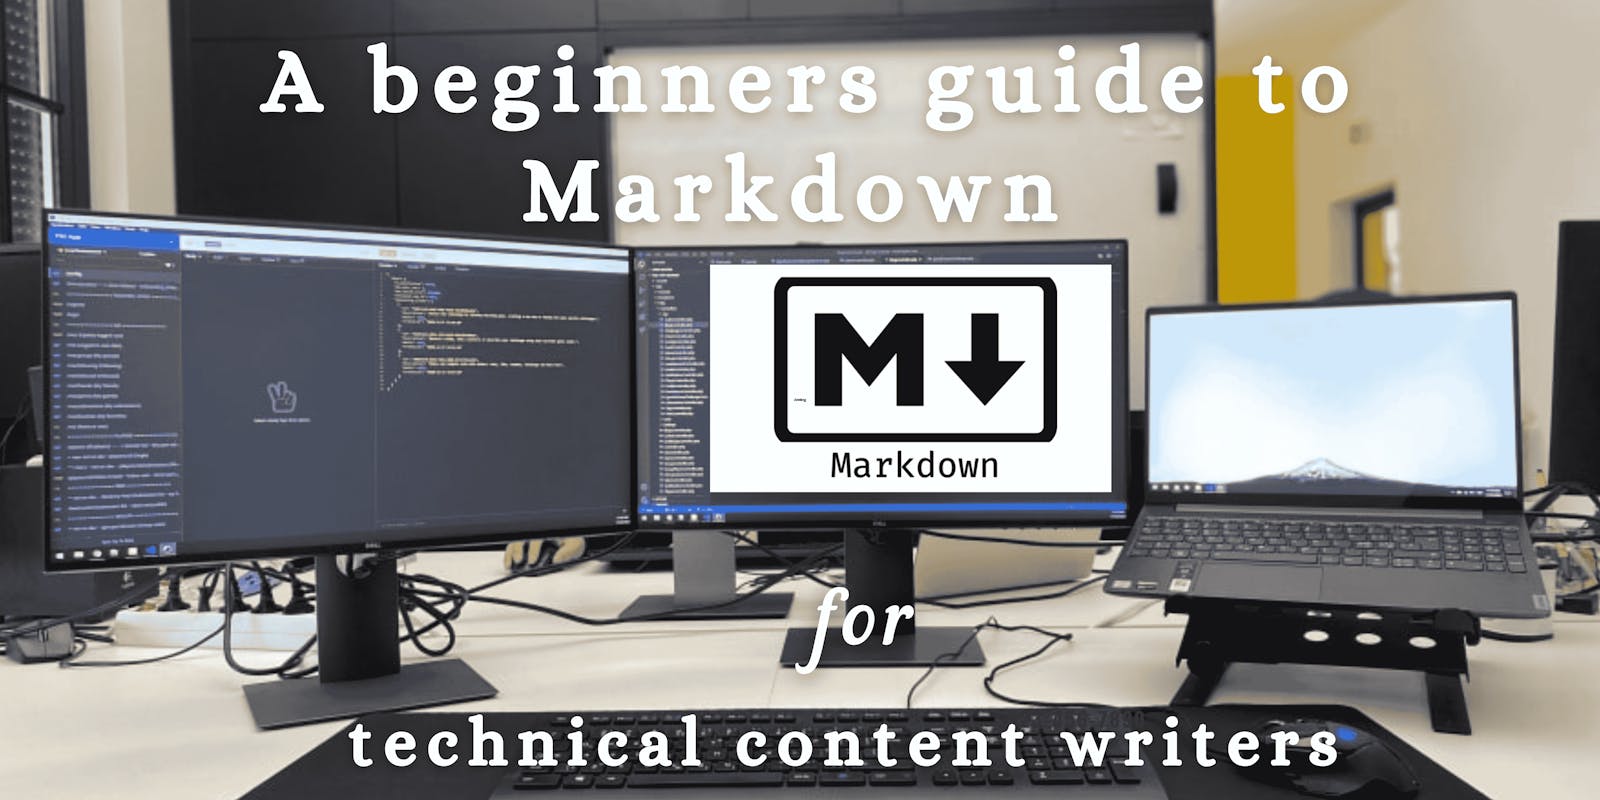 A beginners guide to Markdown for technical content writers